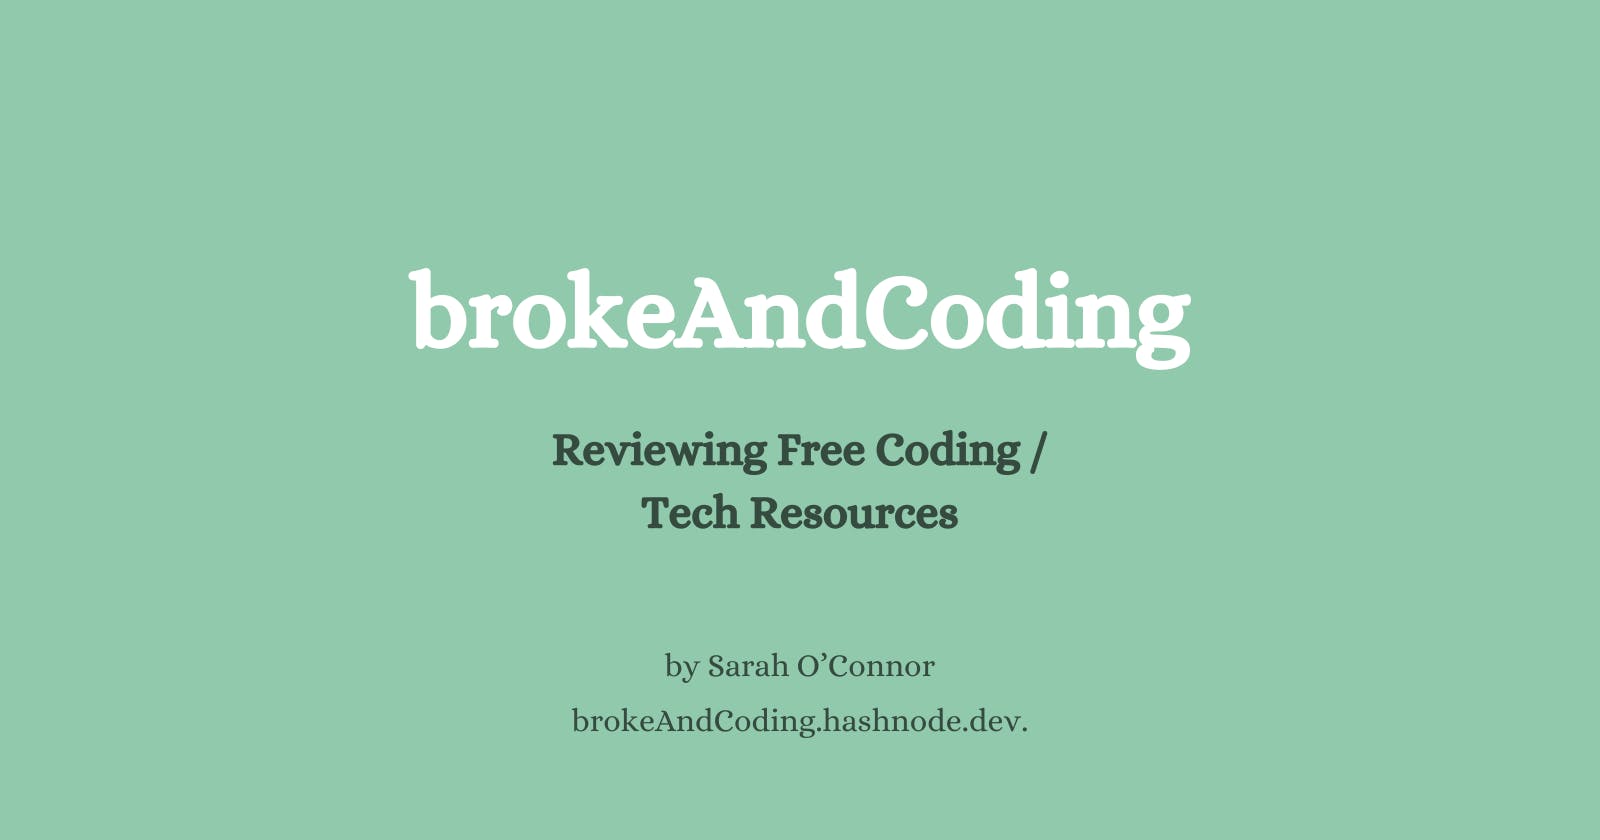 Welcome to brokeAndCoding!